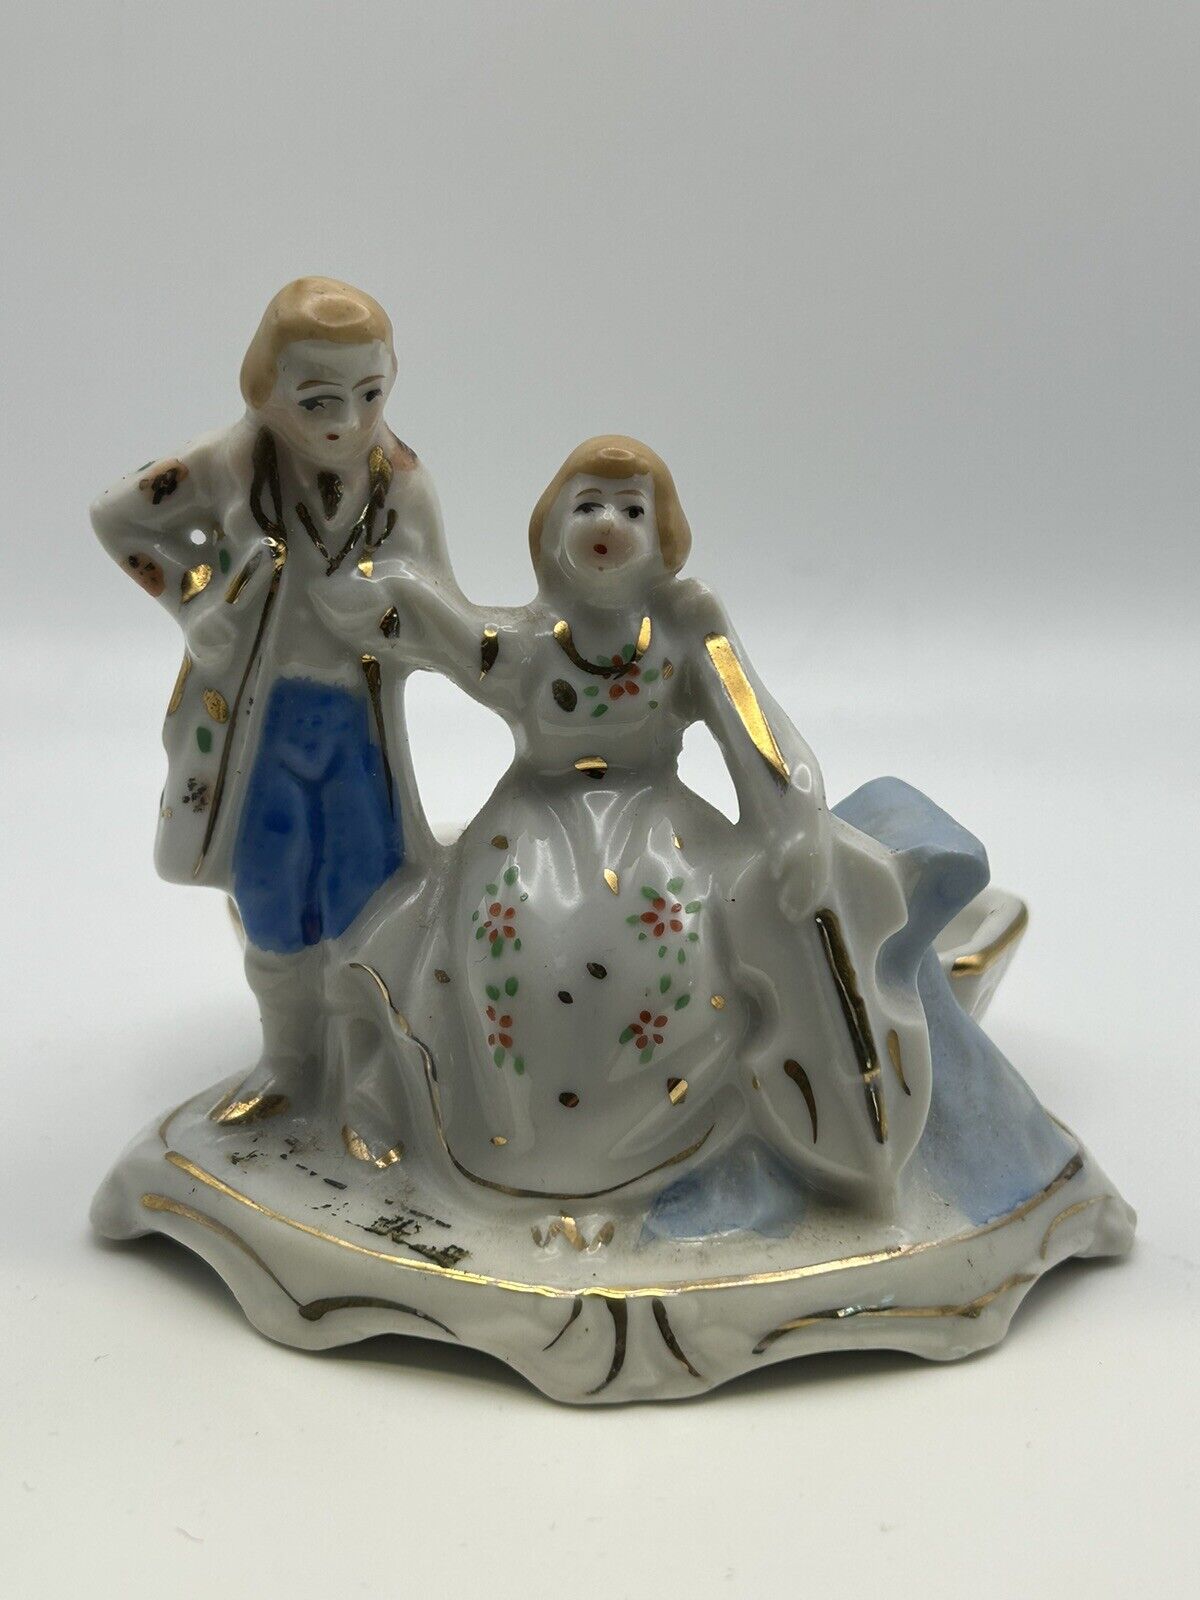 Vintage Miniature Colonial Victorian Couple Figurine Germany Bisque Painted Dish